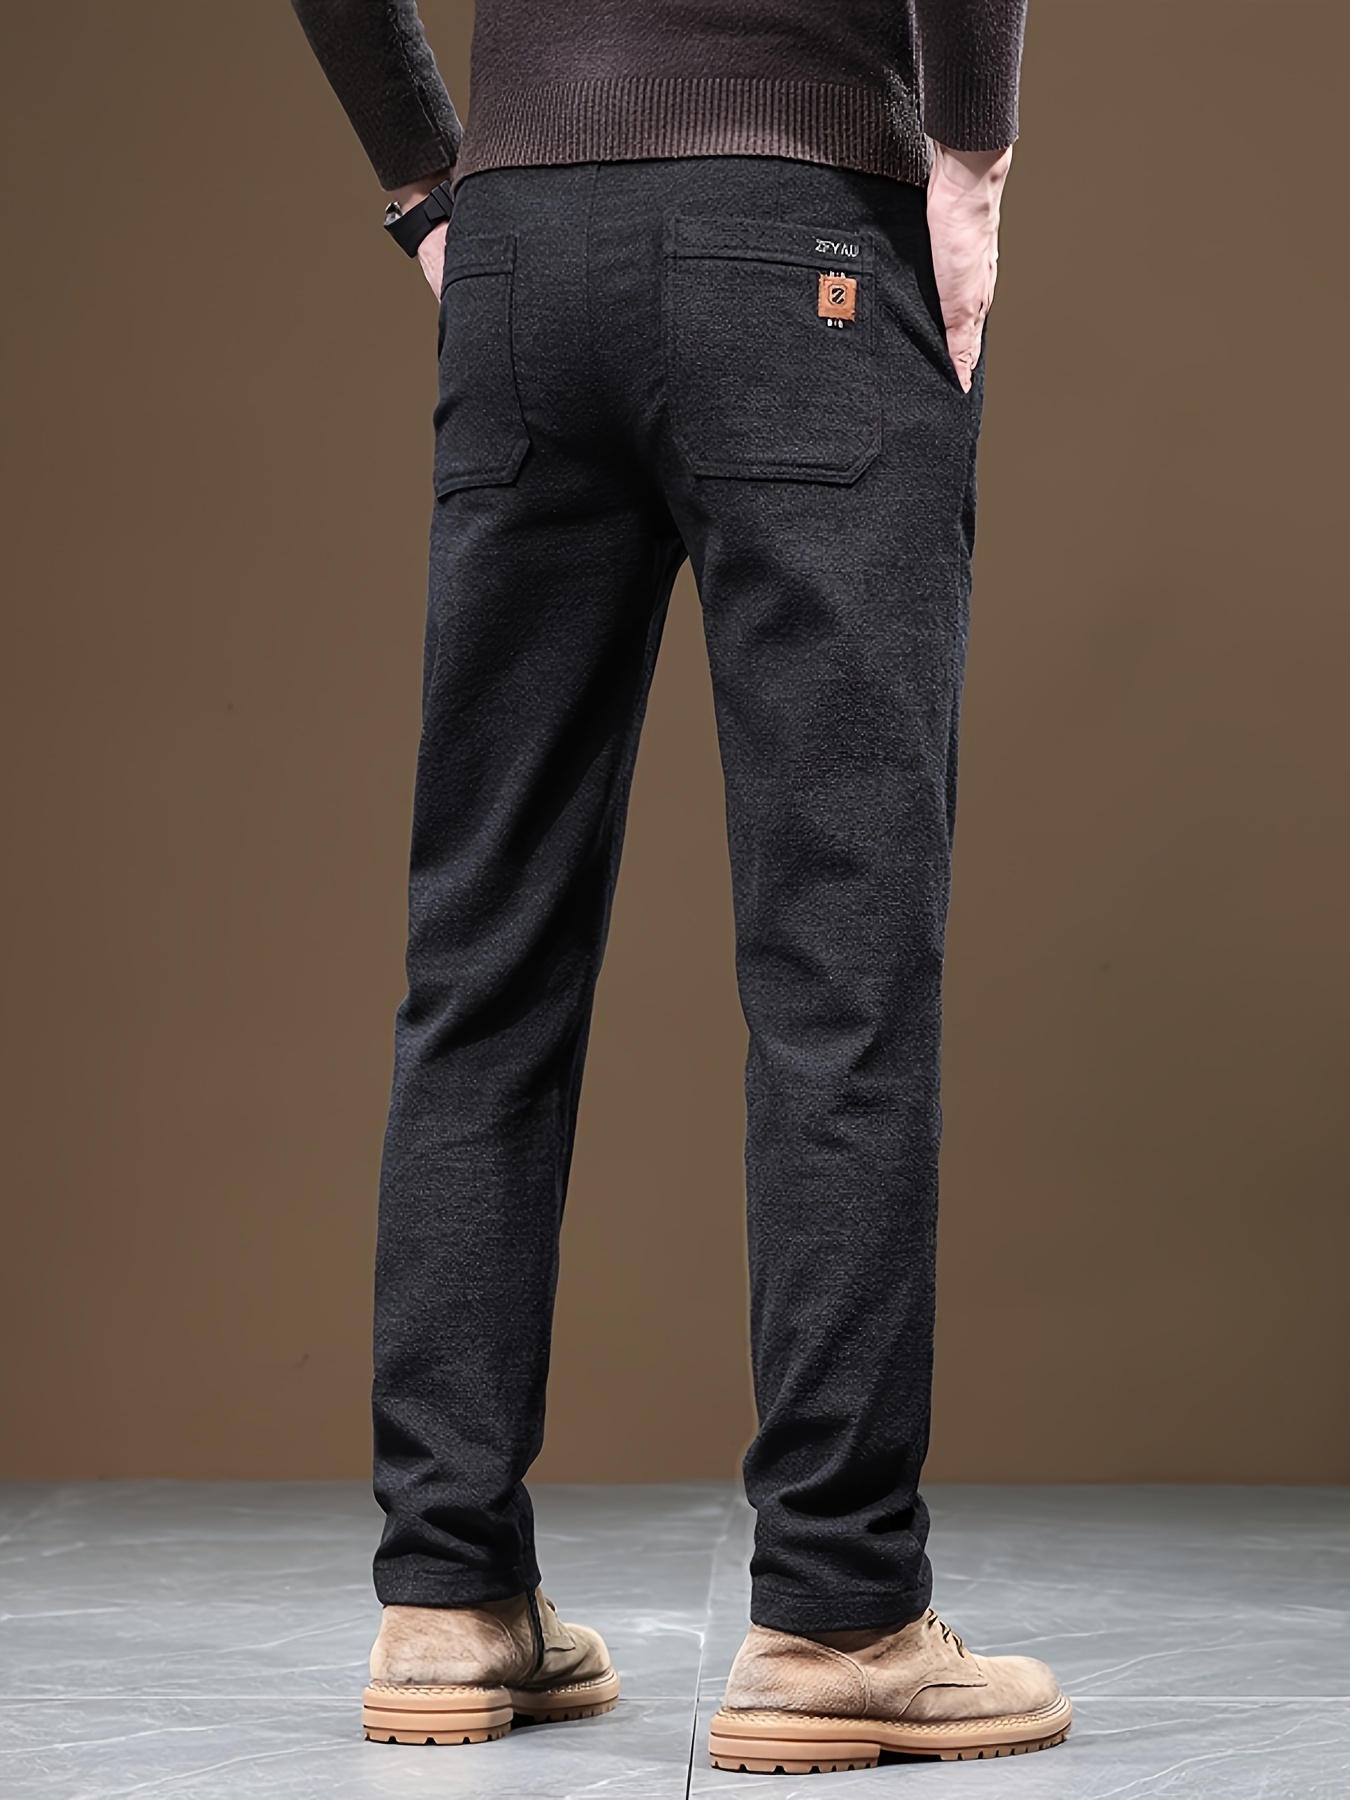 Buy Brown Trousers & Pants for Men by Tistabene Online